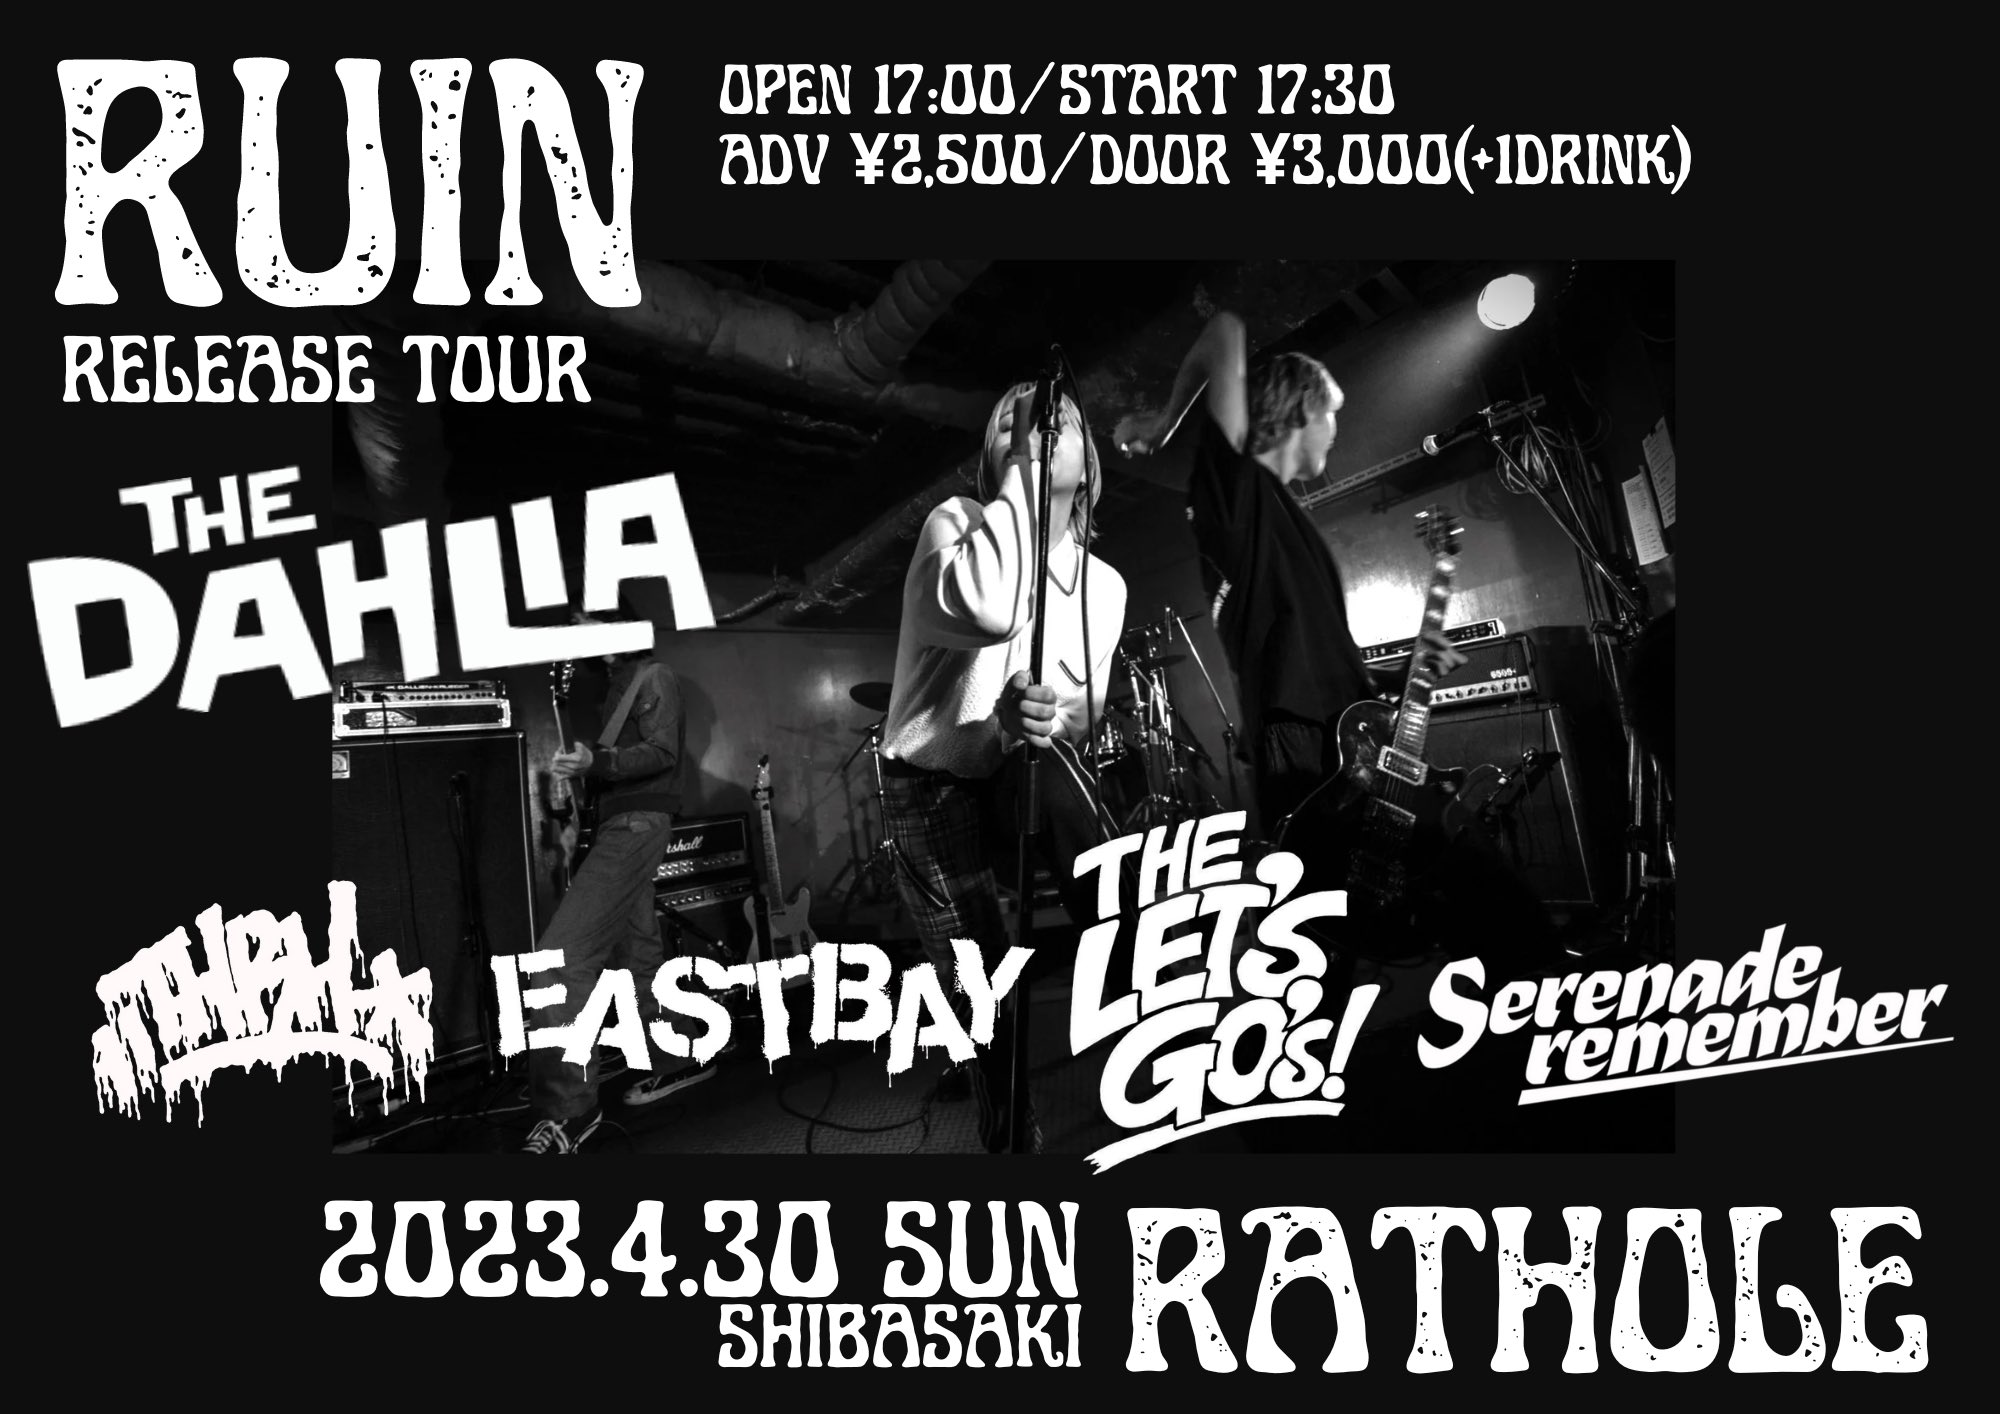 The Dahlia 2nd EP “RUIN” Release Tour in TOKYOの写真